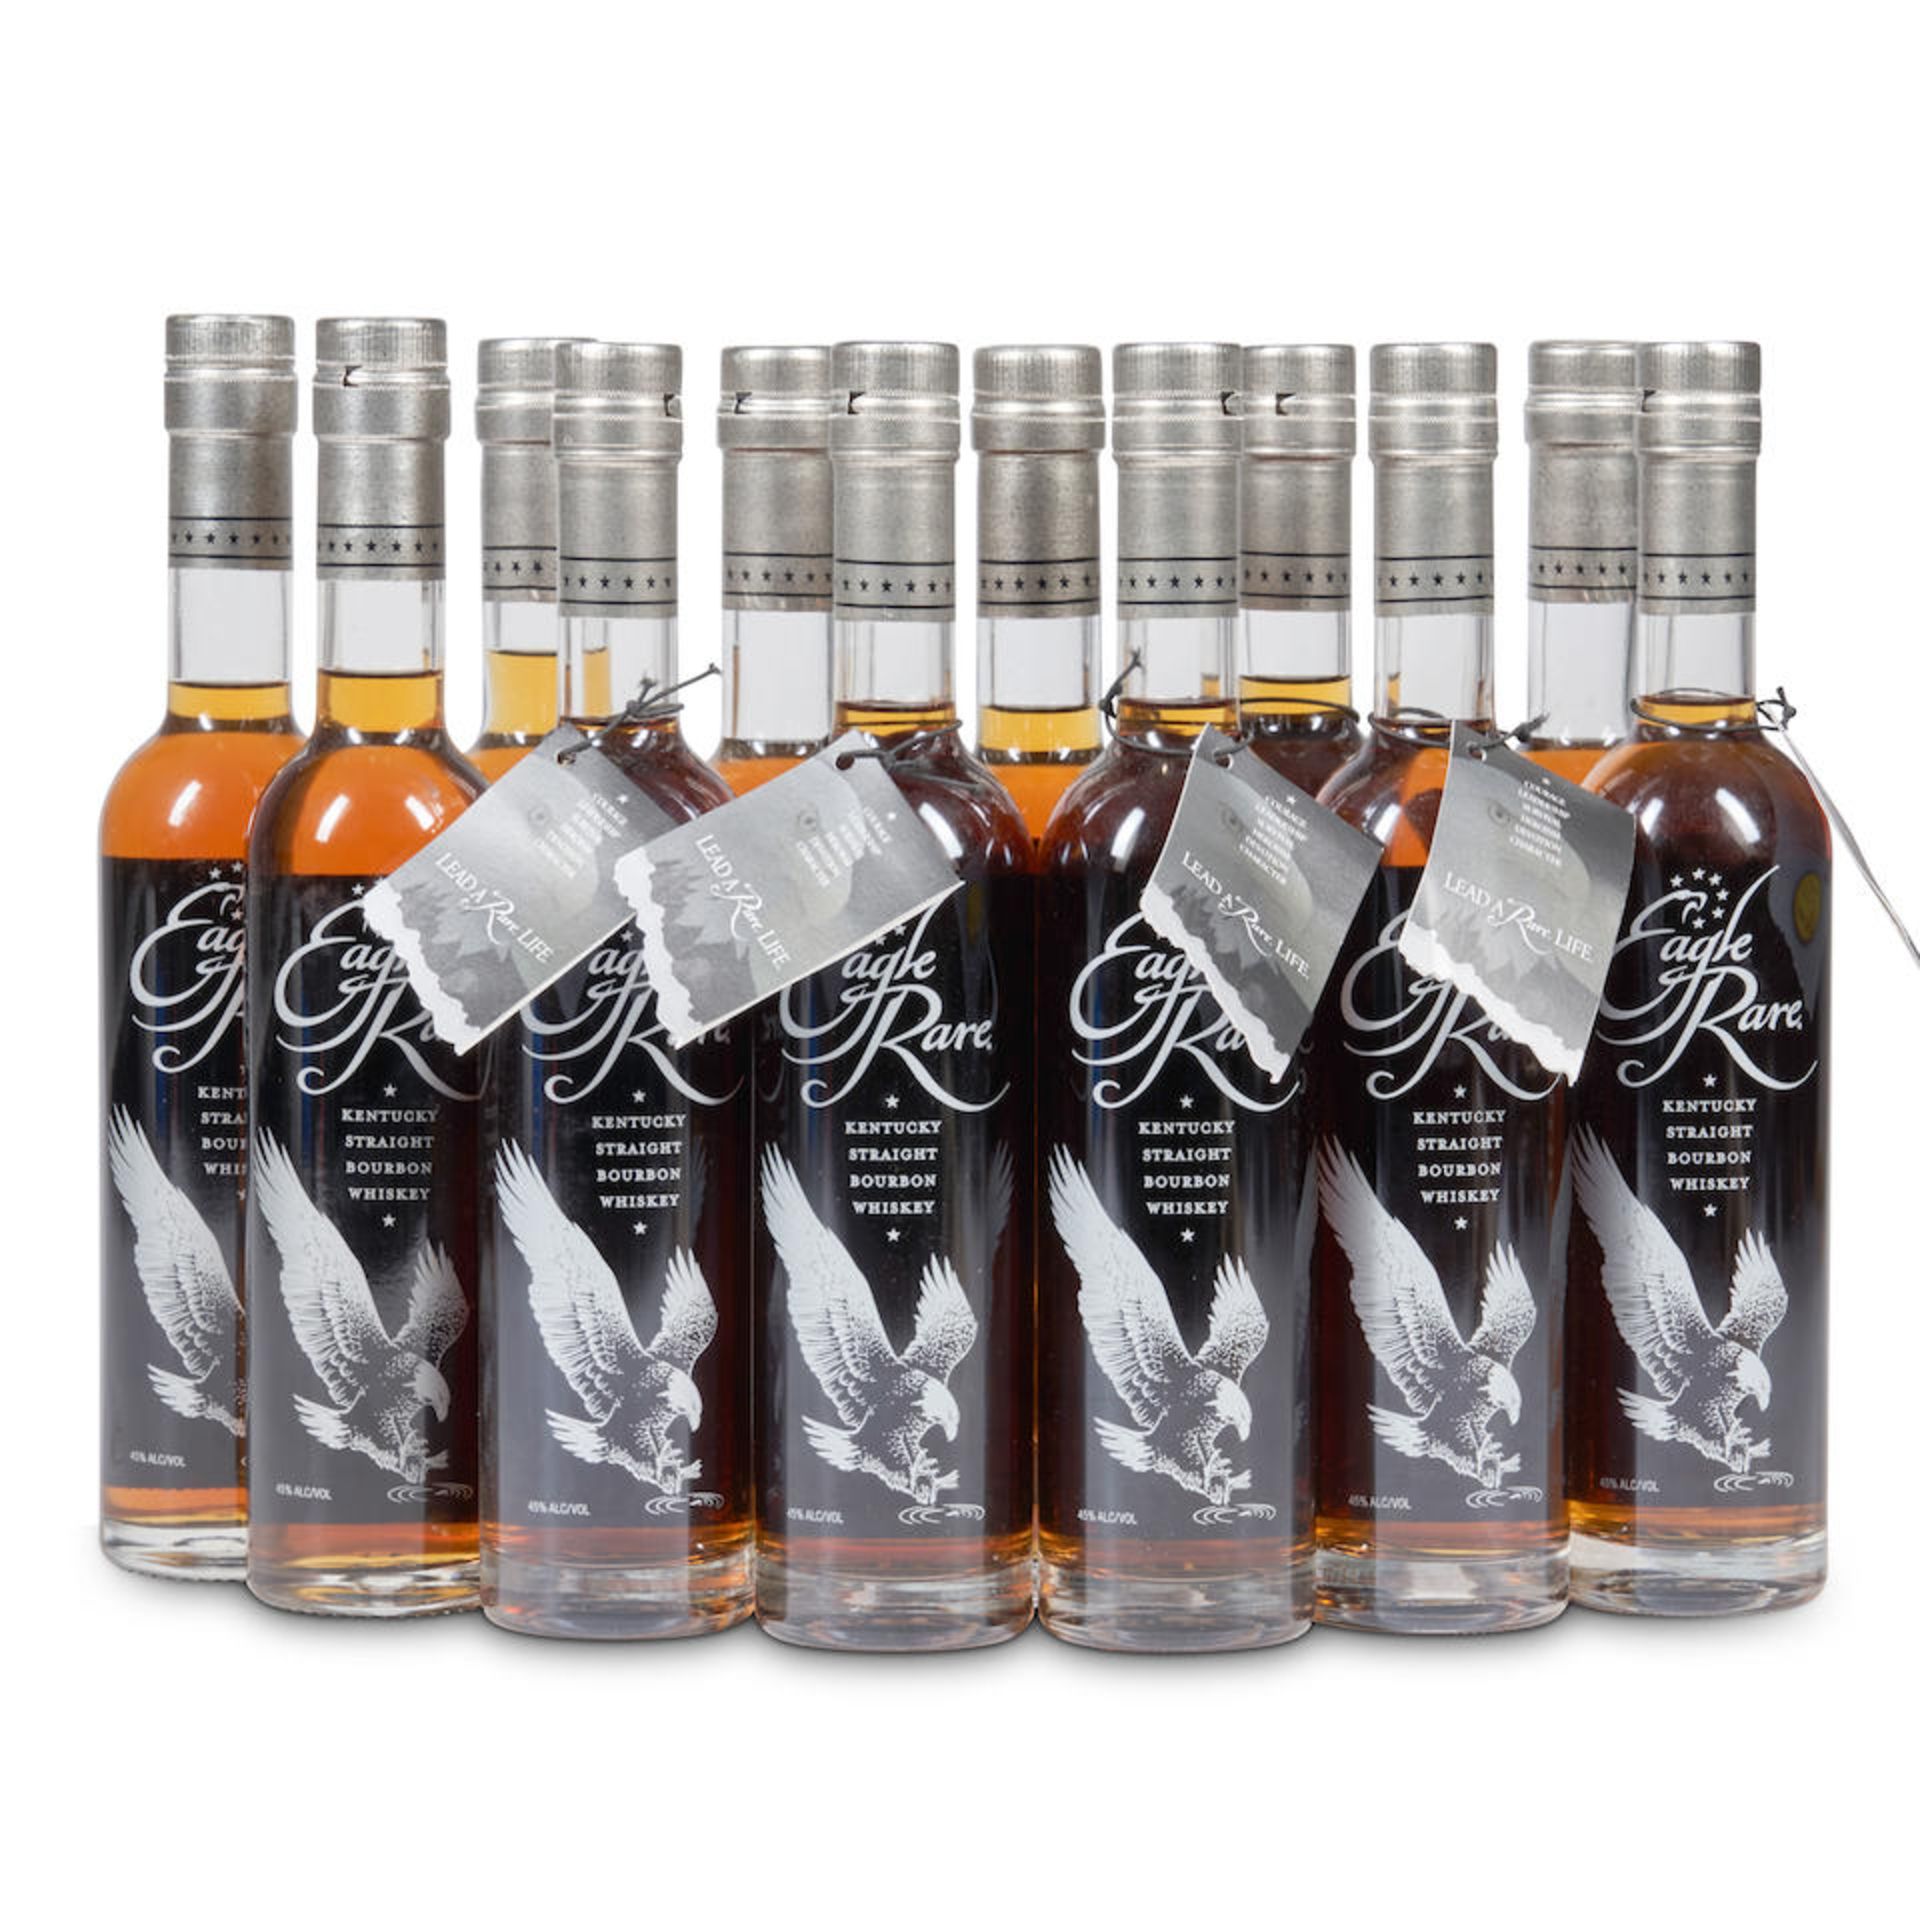 Eagle Rare 10 Years Old (12 375ml bottles)